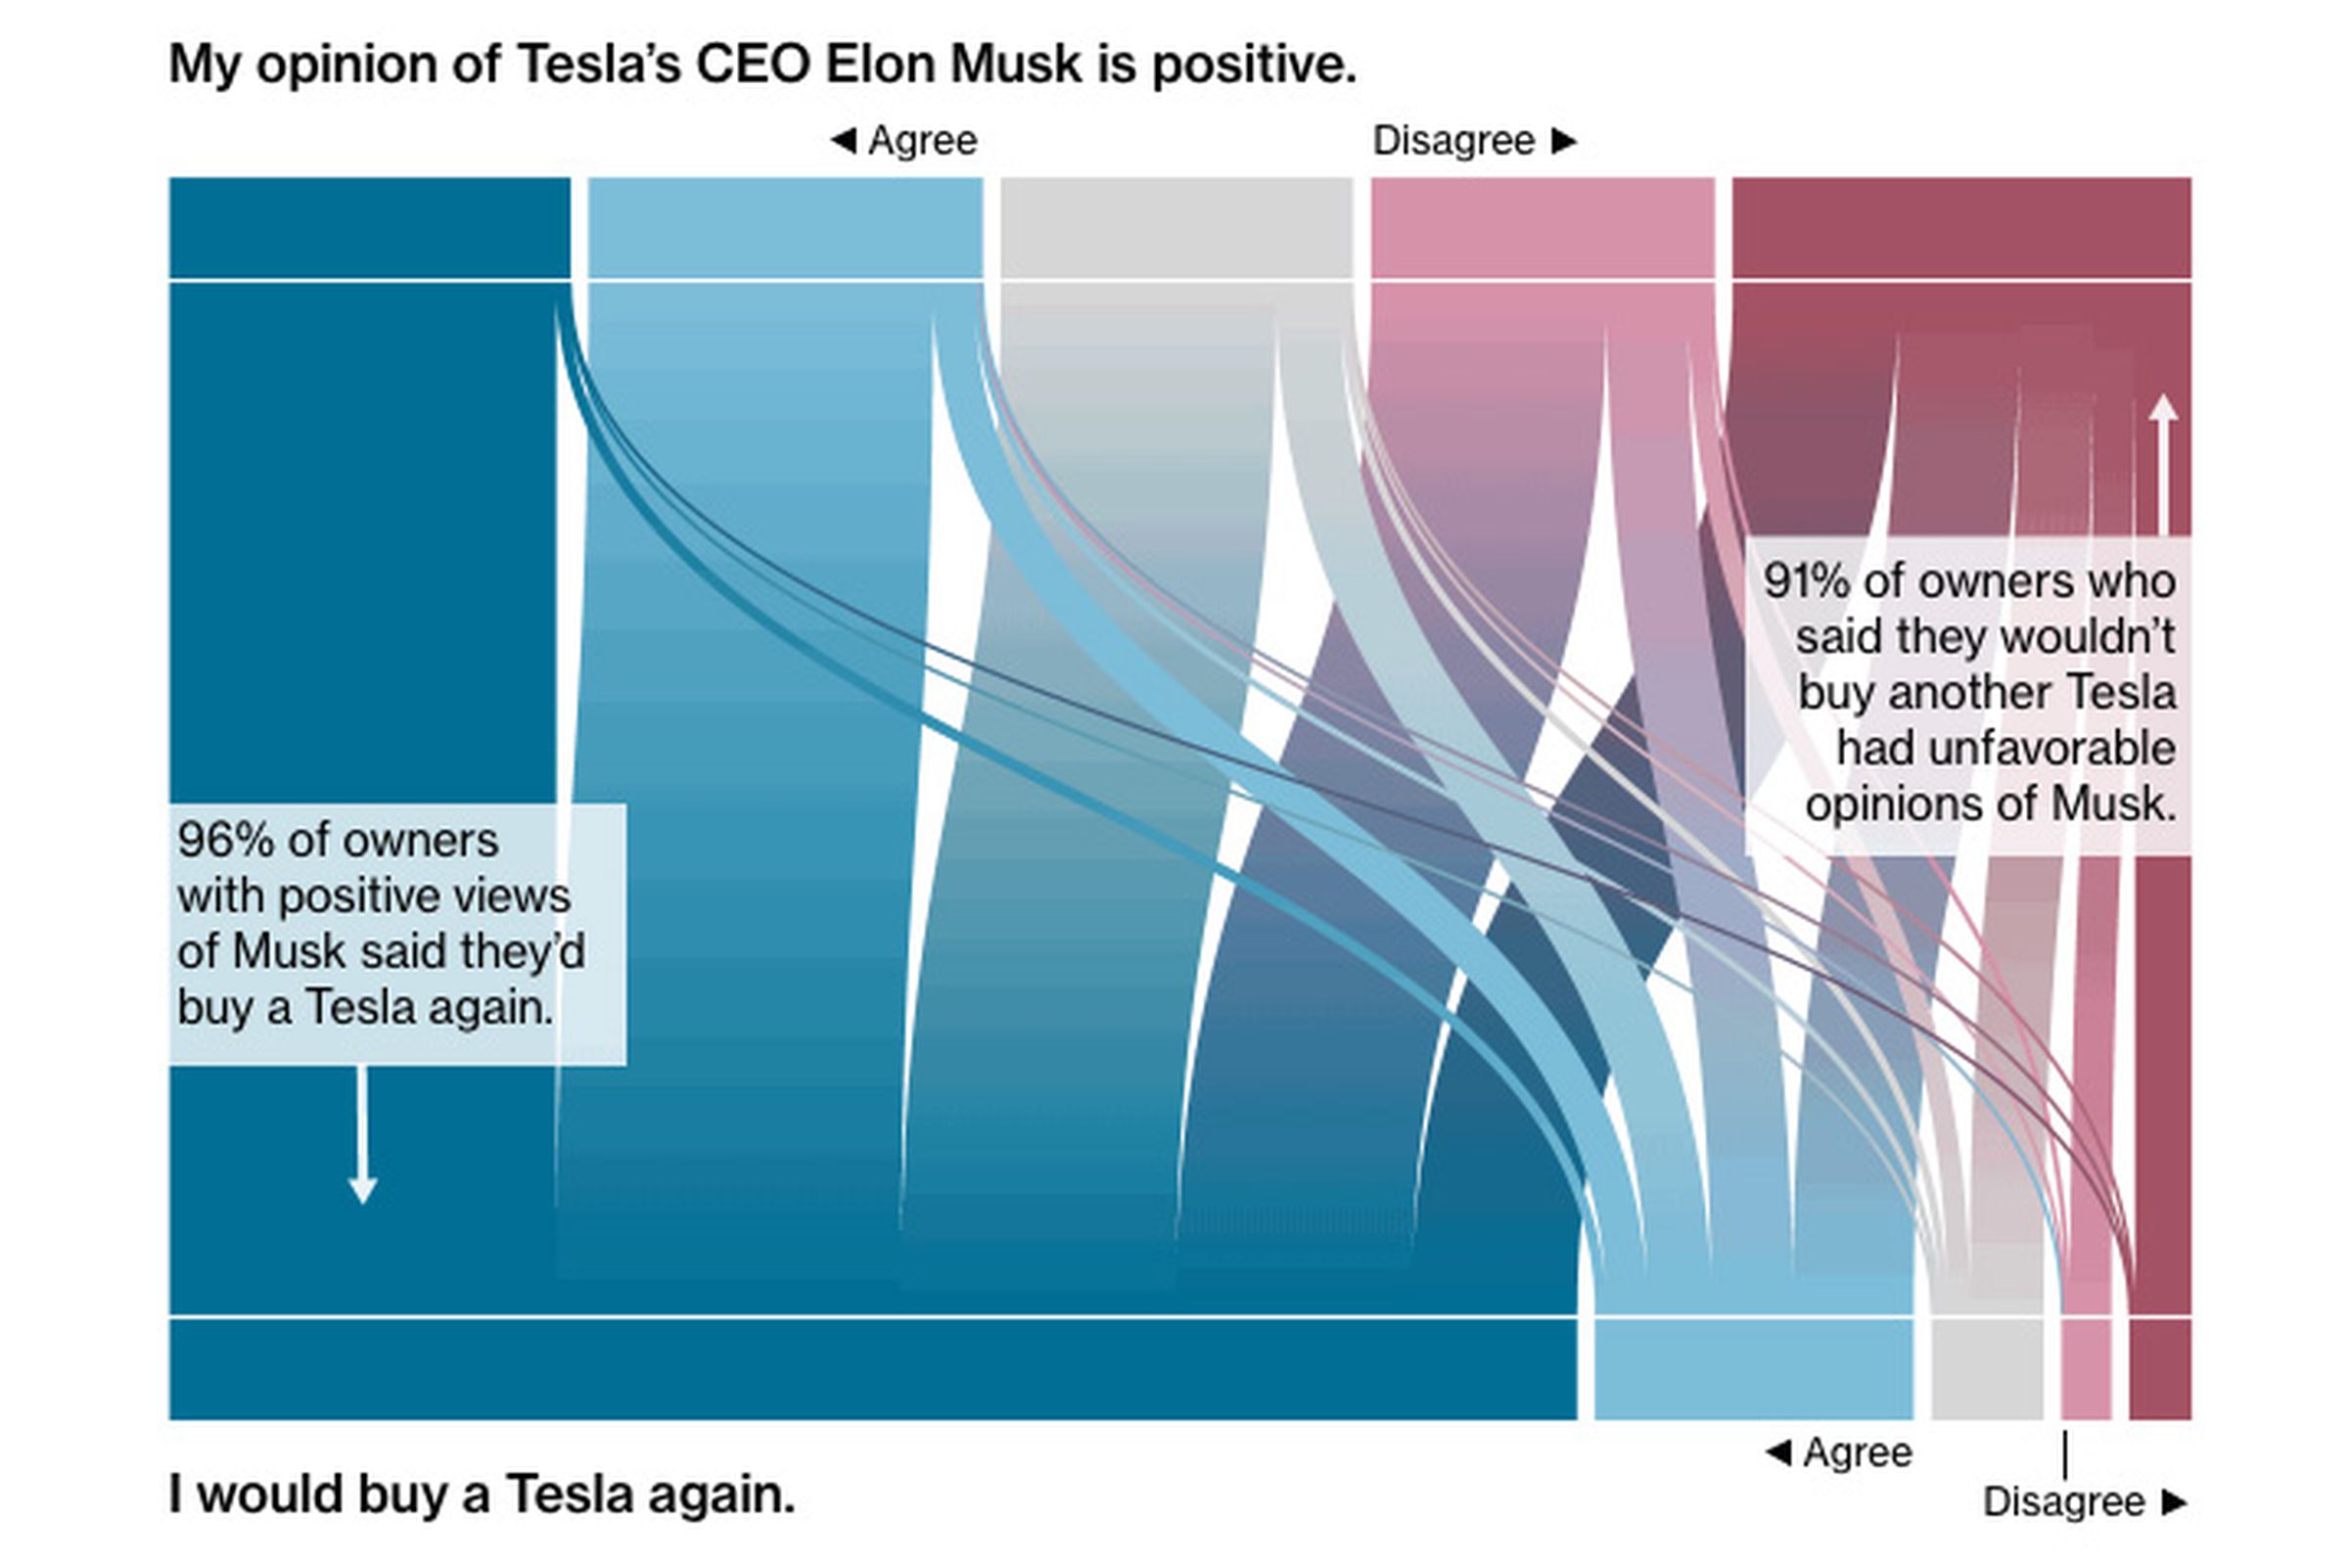 A graph showing sentiments on Elon Musk versus whether people would buy a Tesla again.